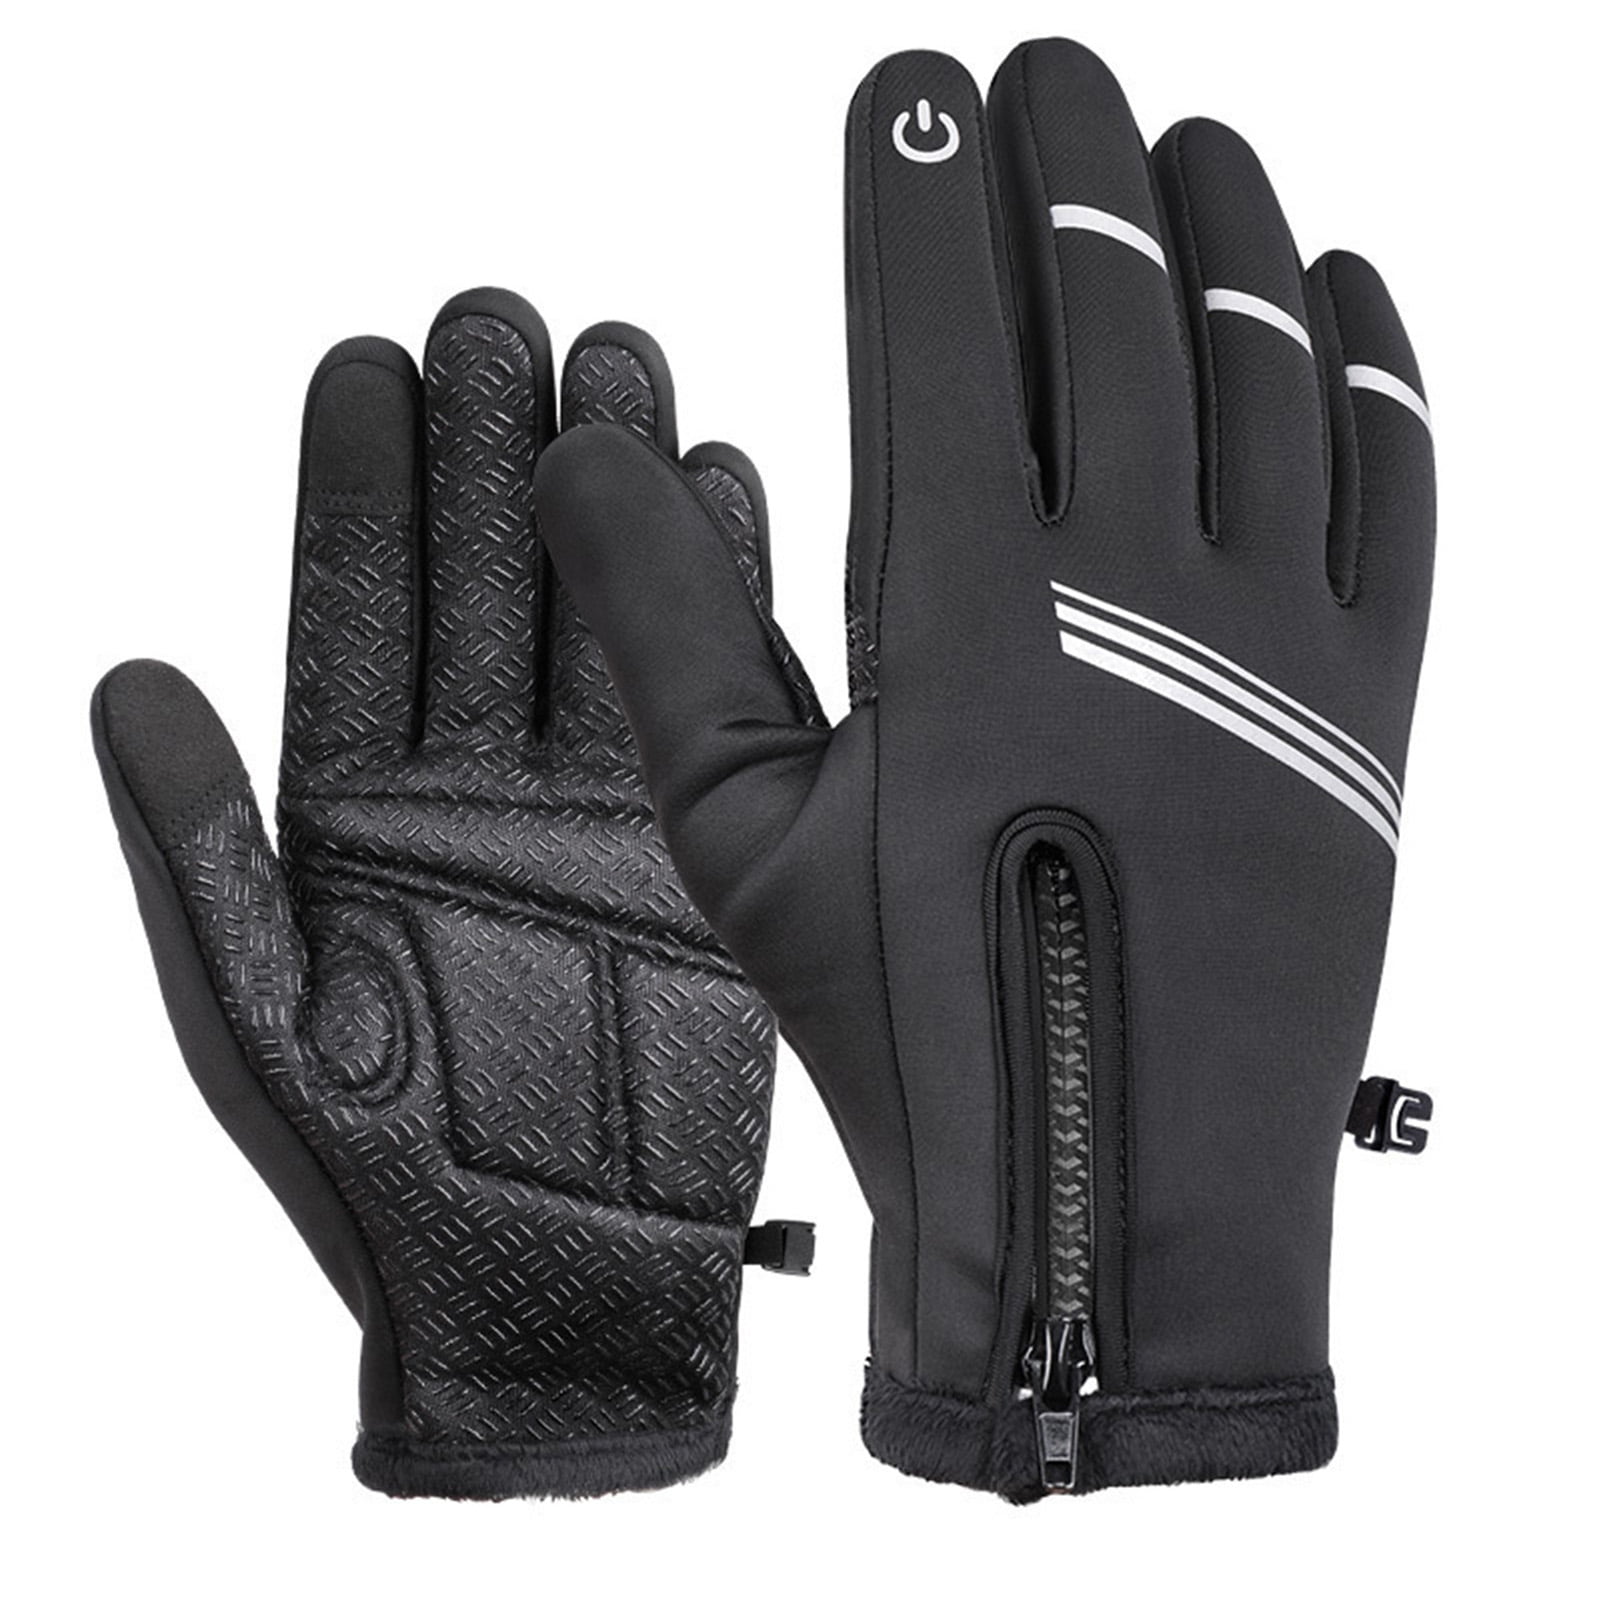 COLOMBIA BIKE GLOVES COFFEE BIKE LOVER CYCLING GLOVES M L XL CAFE COLOMBIA GLOVE 